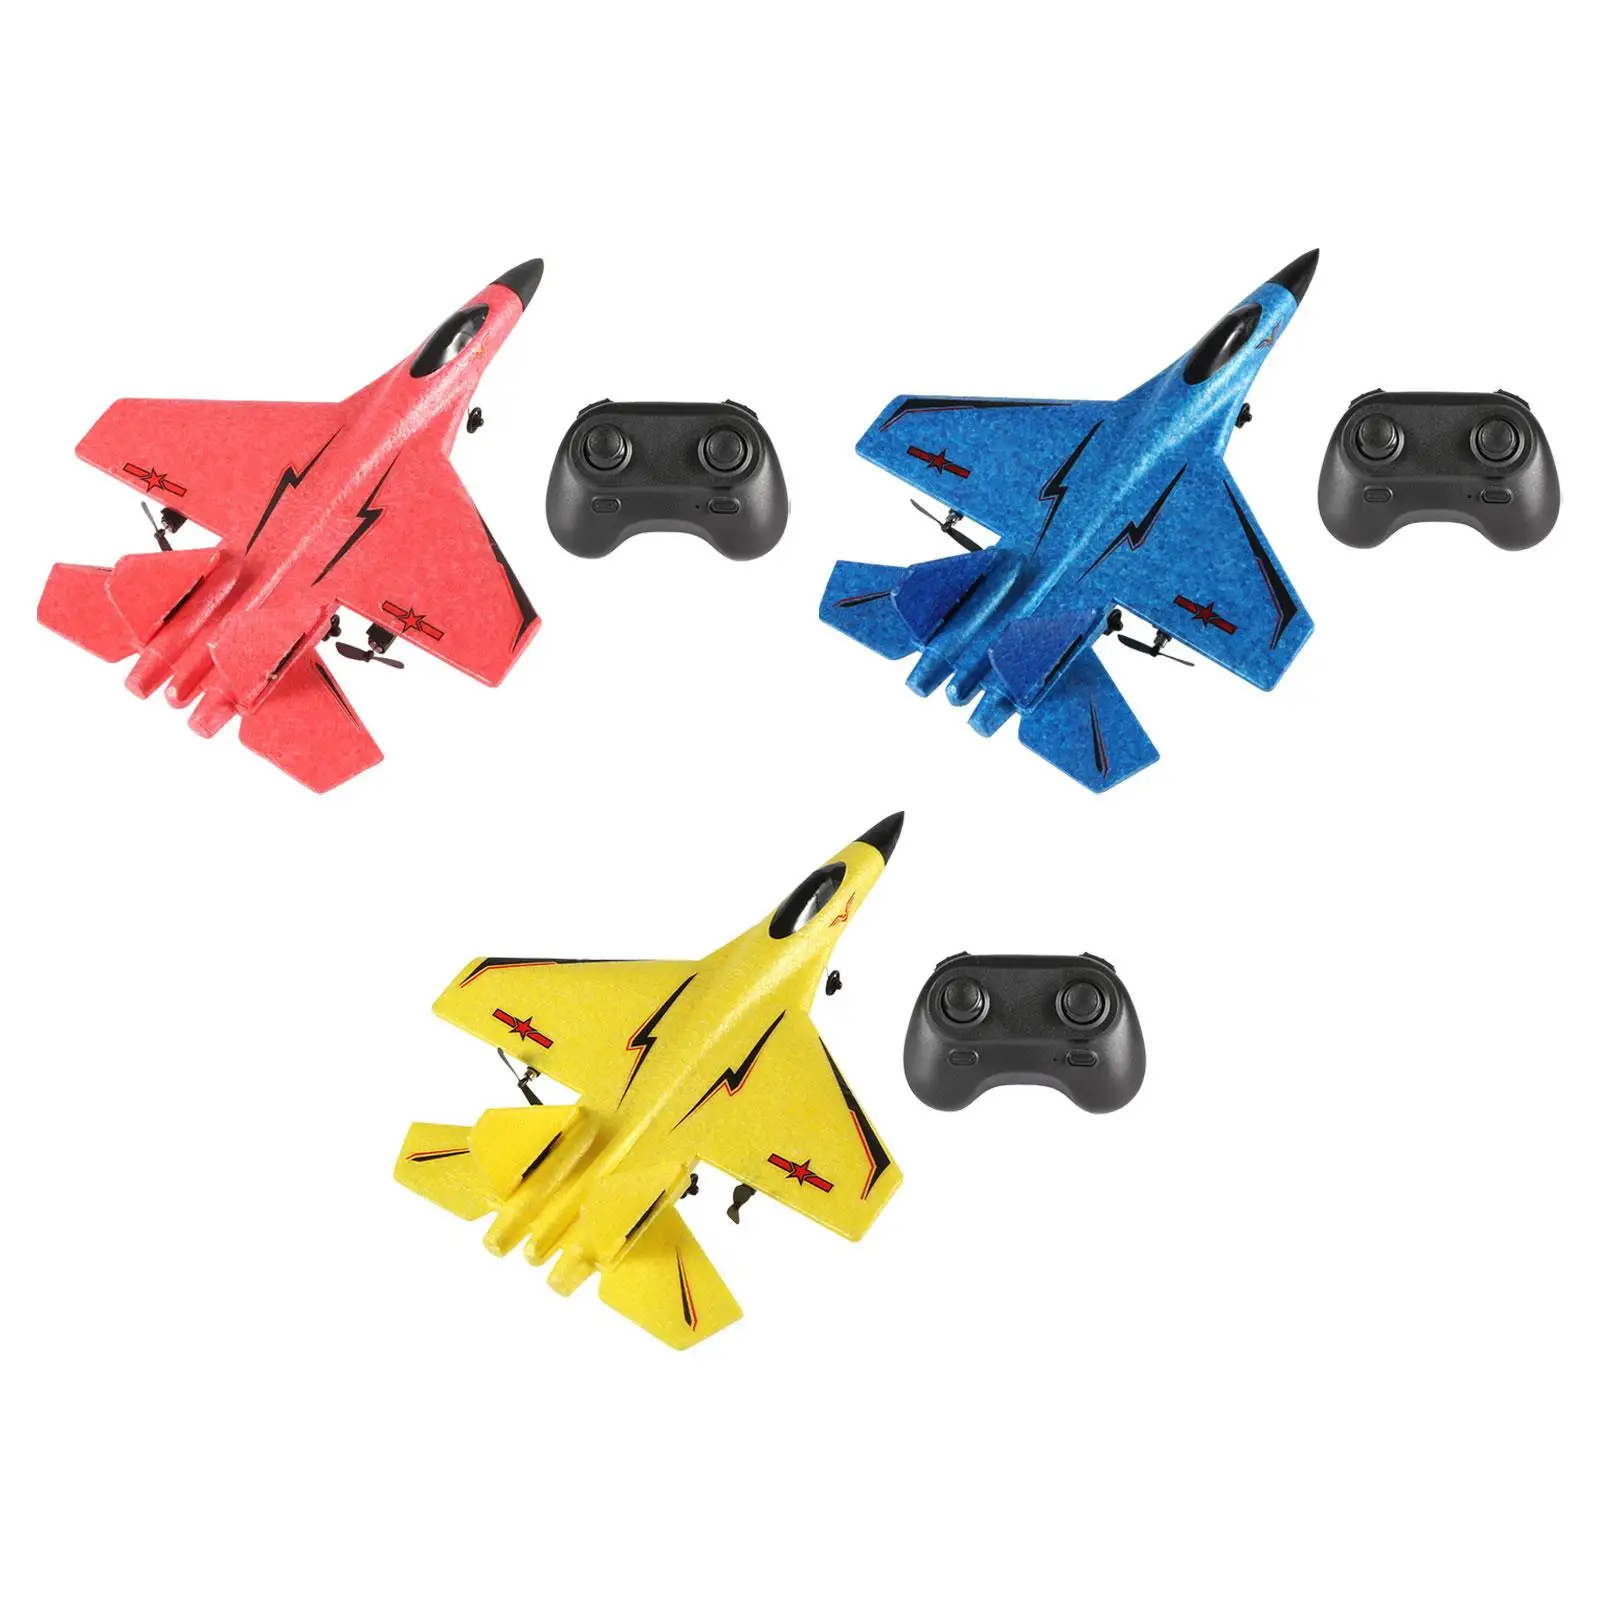 RC Plane Foam Airplane A Key to Take Off Easy to Control Outdoor Toy 2 Channel Fighter Model RC Fixed Wing RC Jet Glider